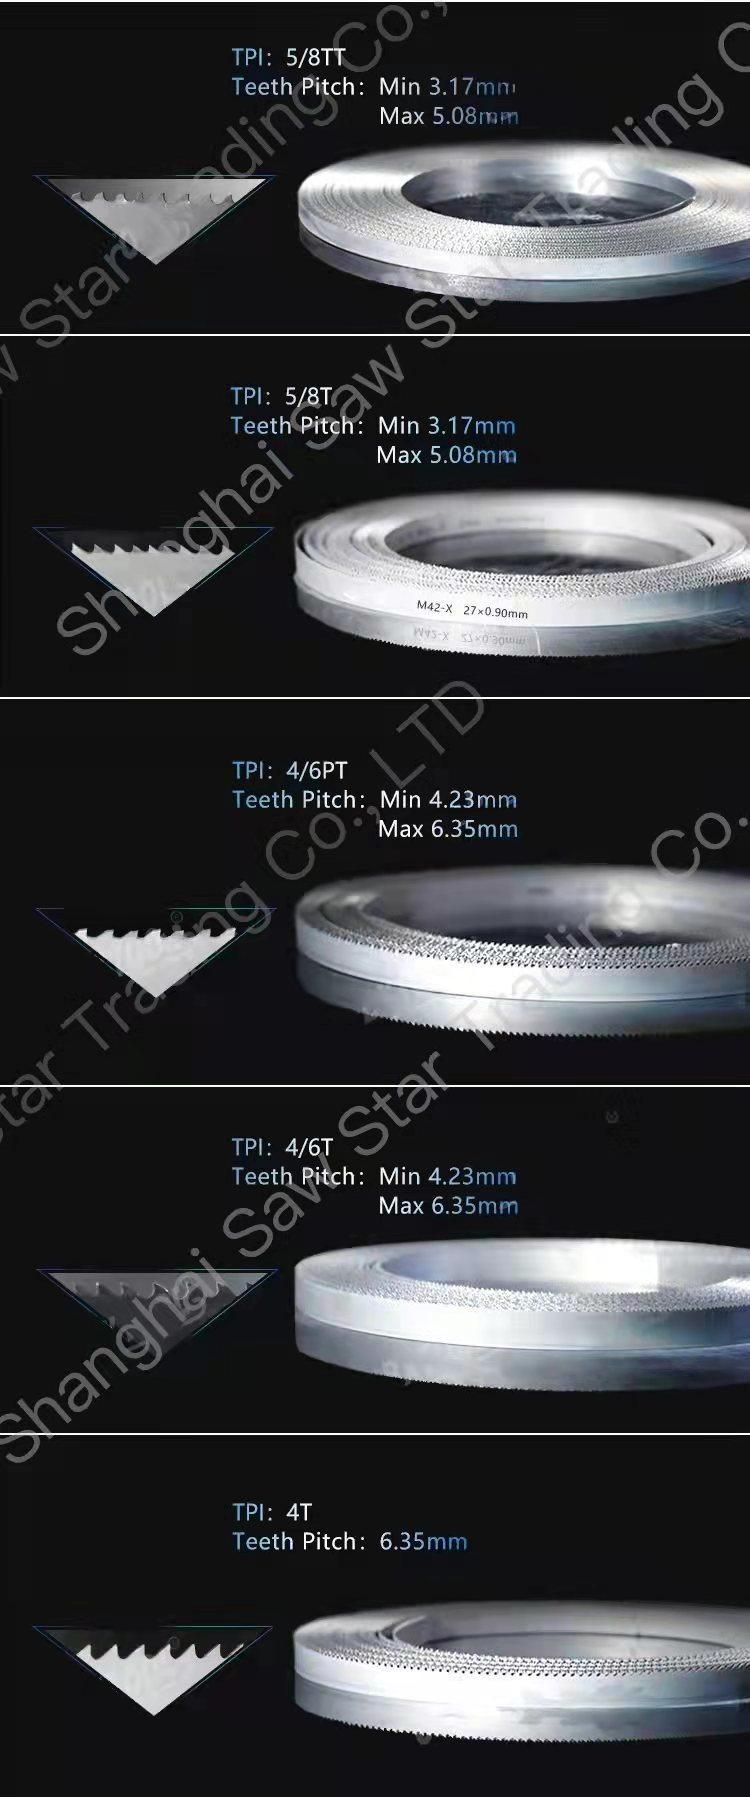 34*1.1*3900*5/8 Bimetal Band Saw Blade with The Best Cutting Effect